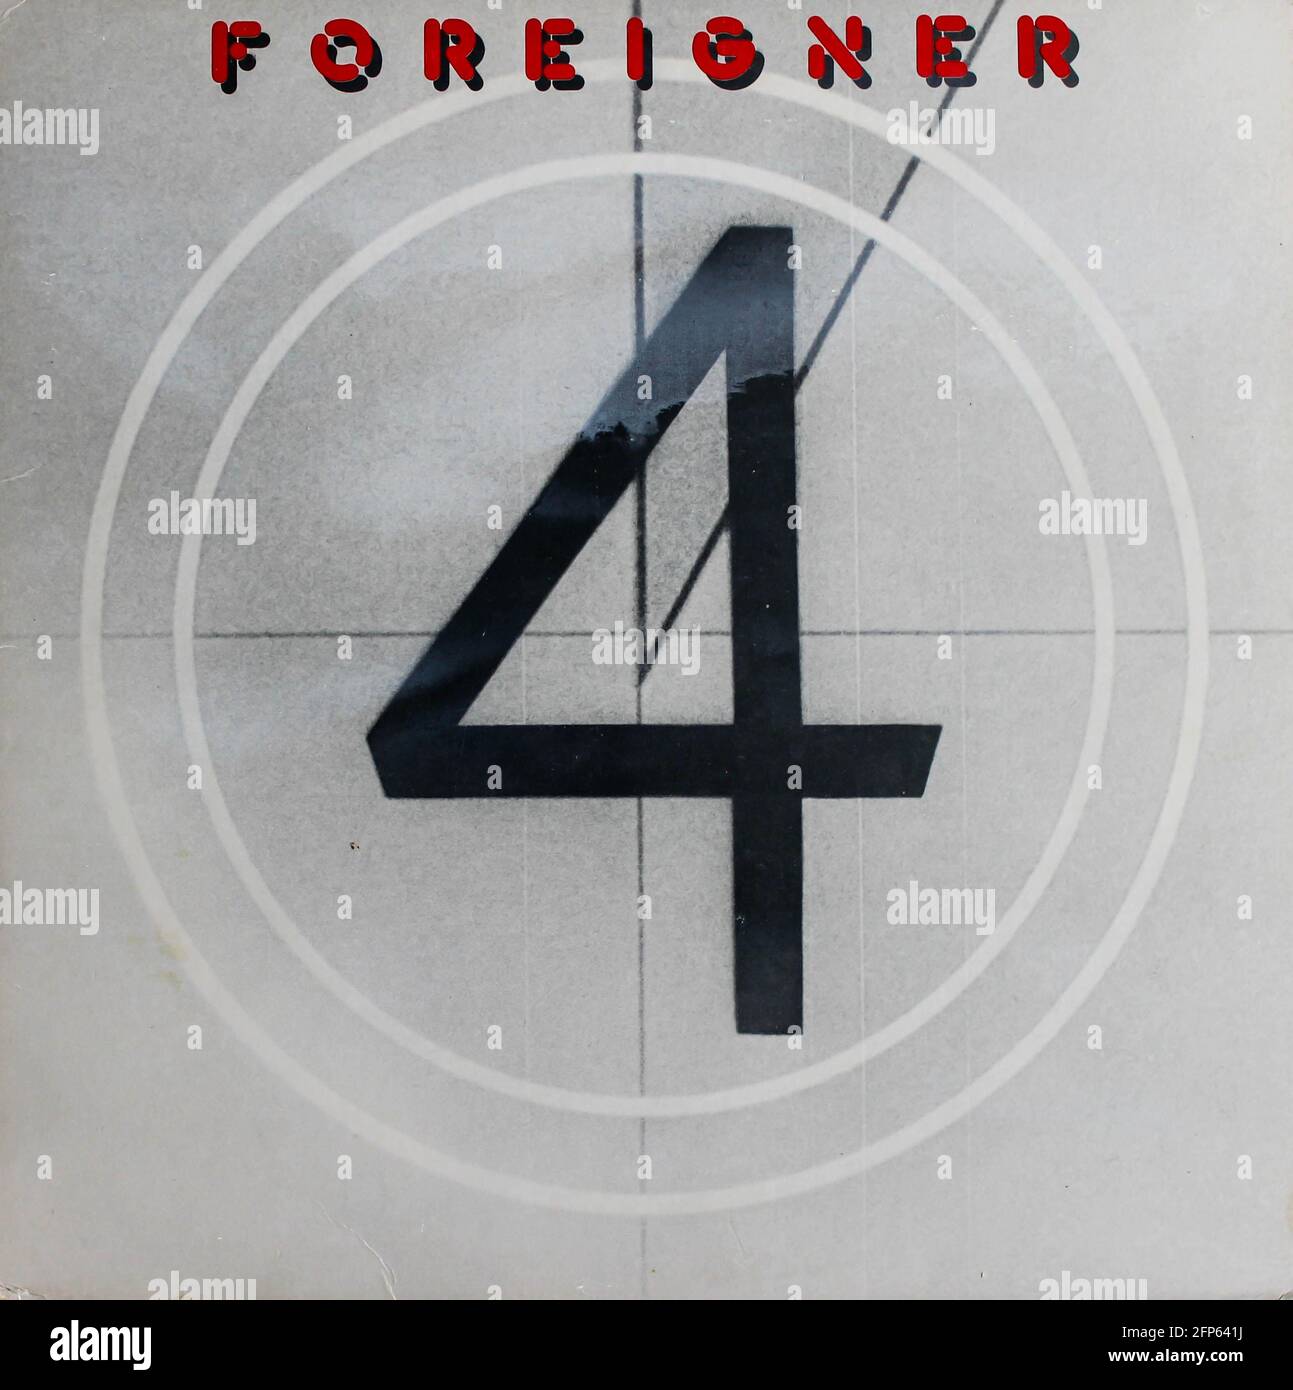 AOR and Rock band, Foreigner music album on vinyl record LP disc. Titled: 4 album cover Stock Photo